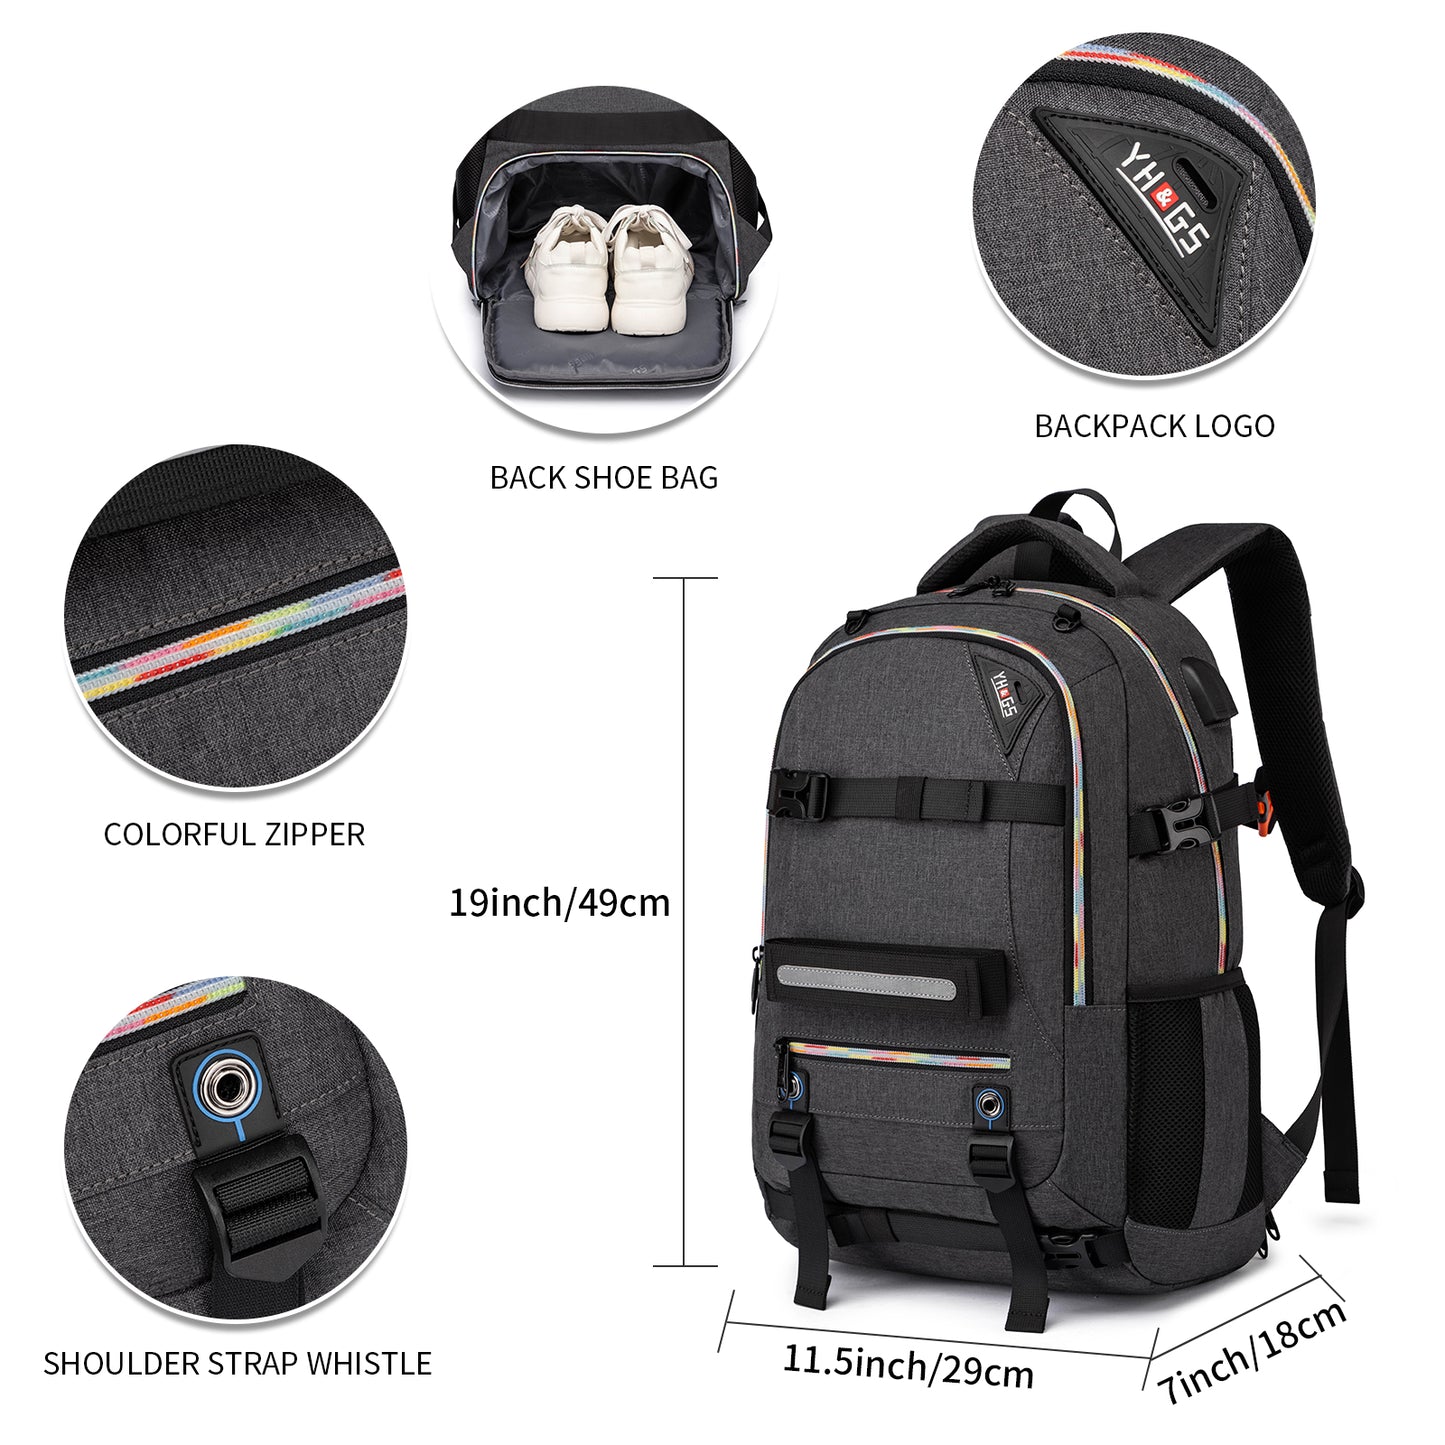 Skateboard Backpack, Laptop Backpack with USB Charging Port, RFID Anti-Theft Lock, Waterproof Fabric, Fits up to 15.6 Inch Laptop, for College School Business Travel Men Boy (Dark Grey)